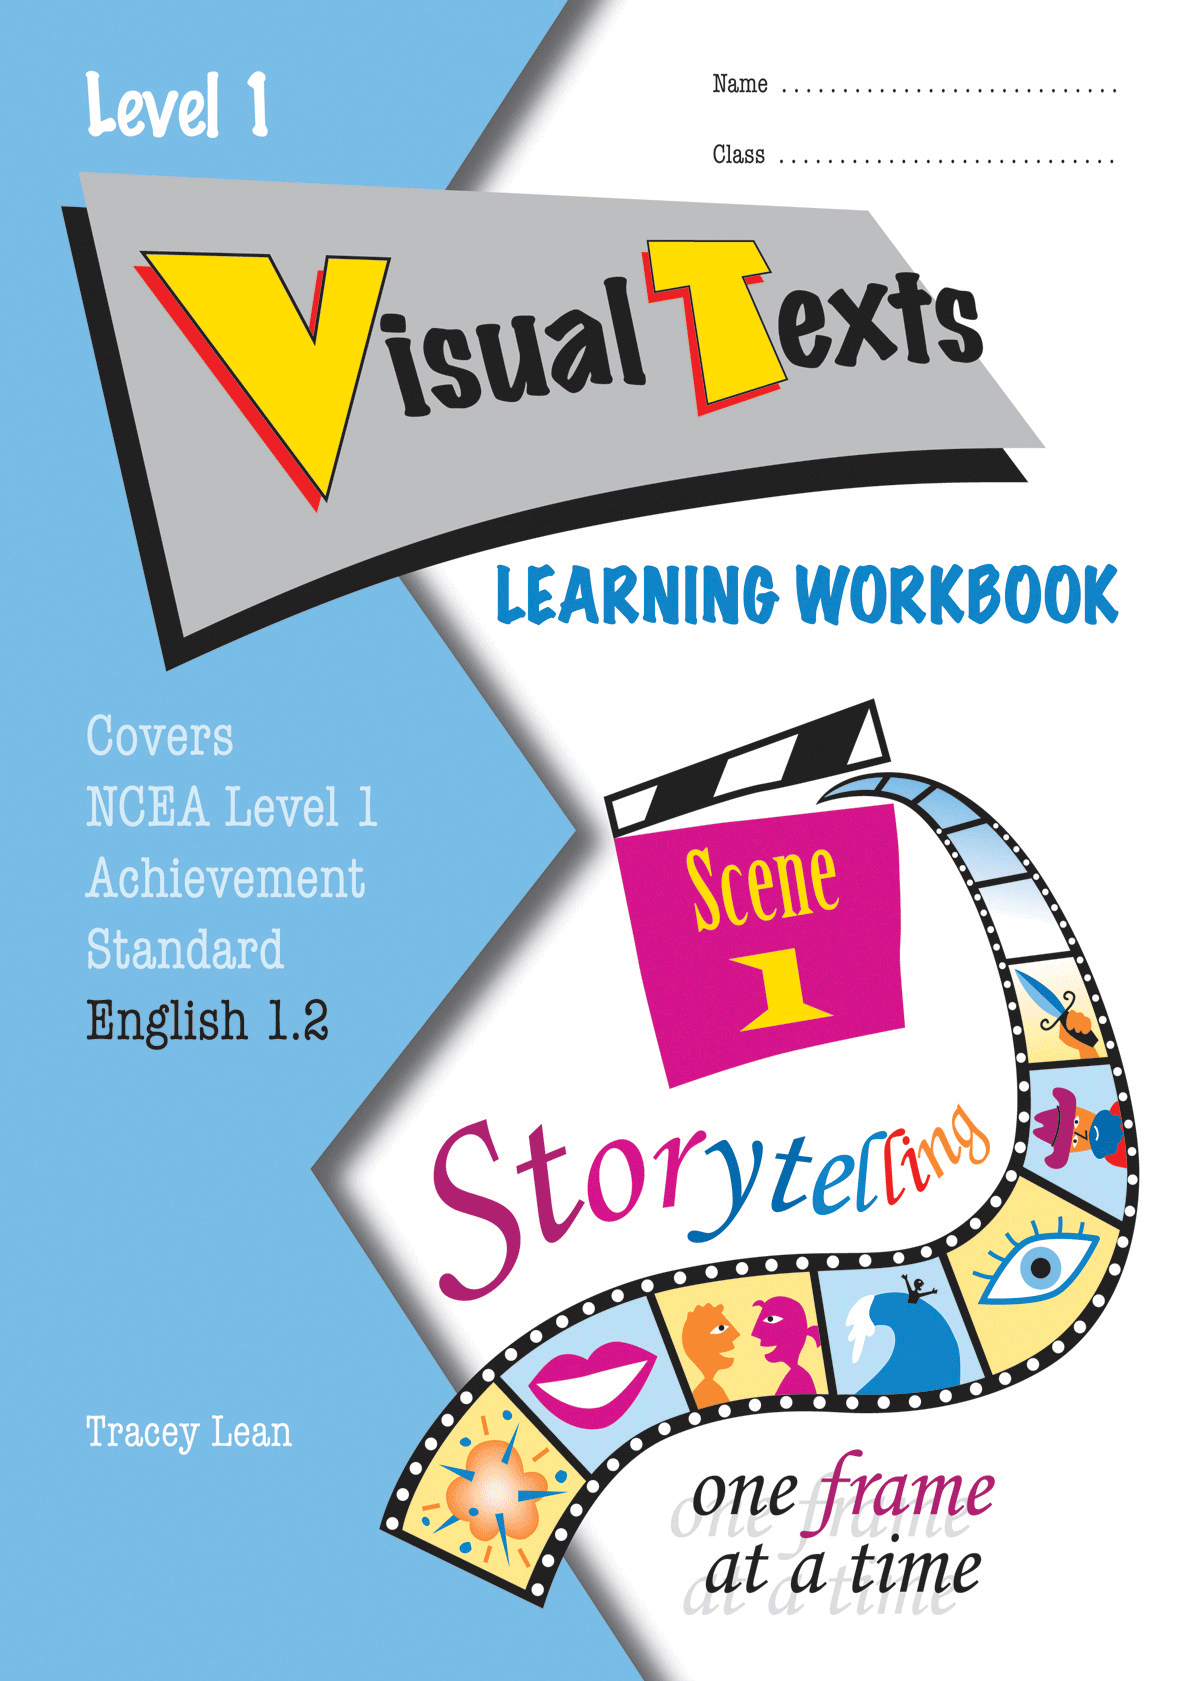 Level 1 Visual Texts 1.2 Learning Workbook